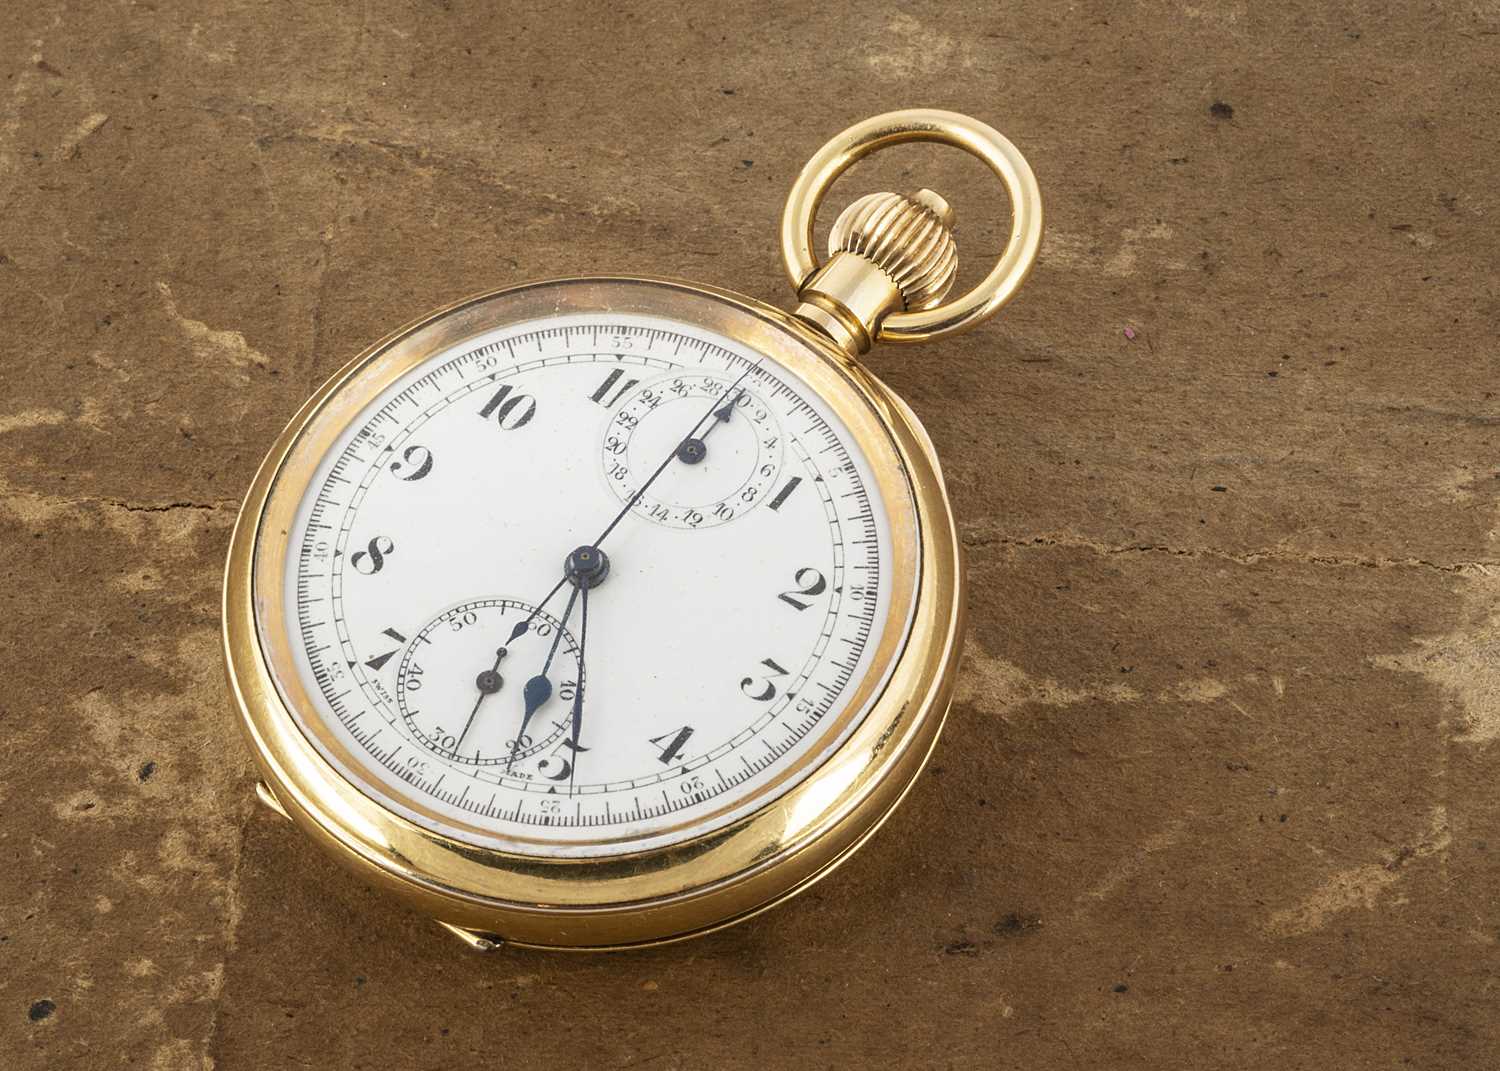 Lot 394 - An early 20th century gold plated open faced pocket watch